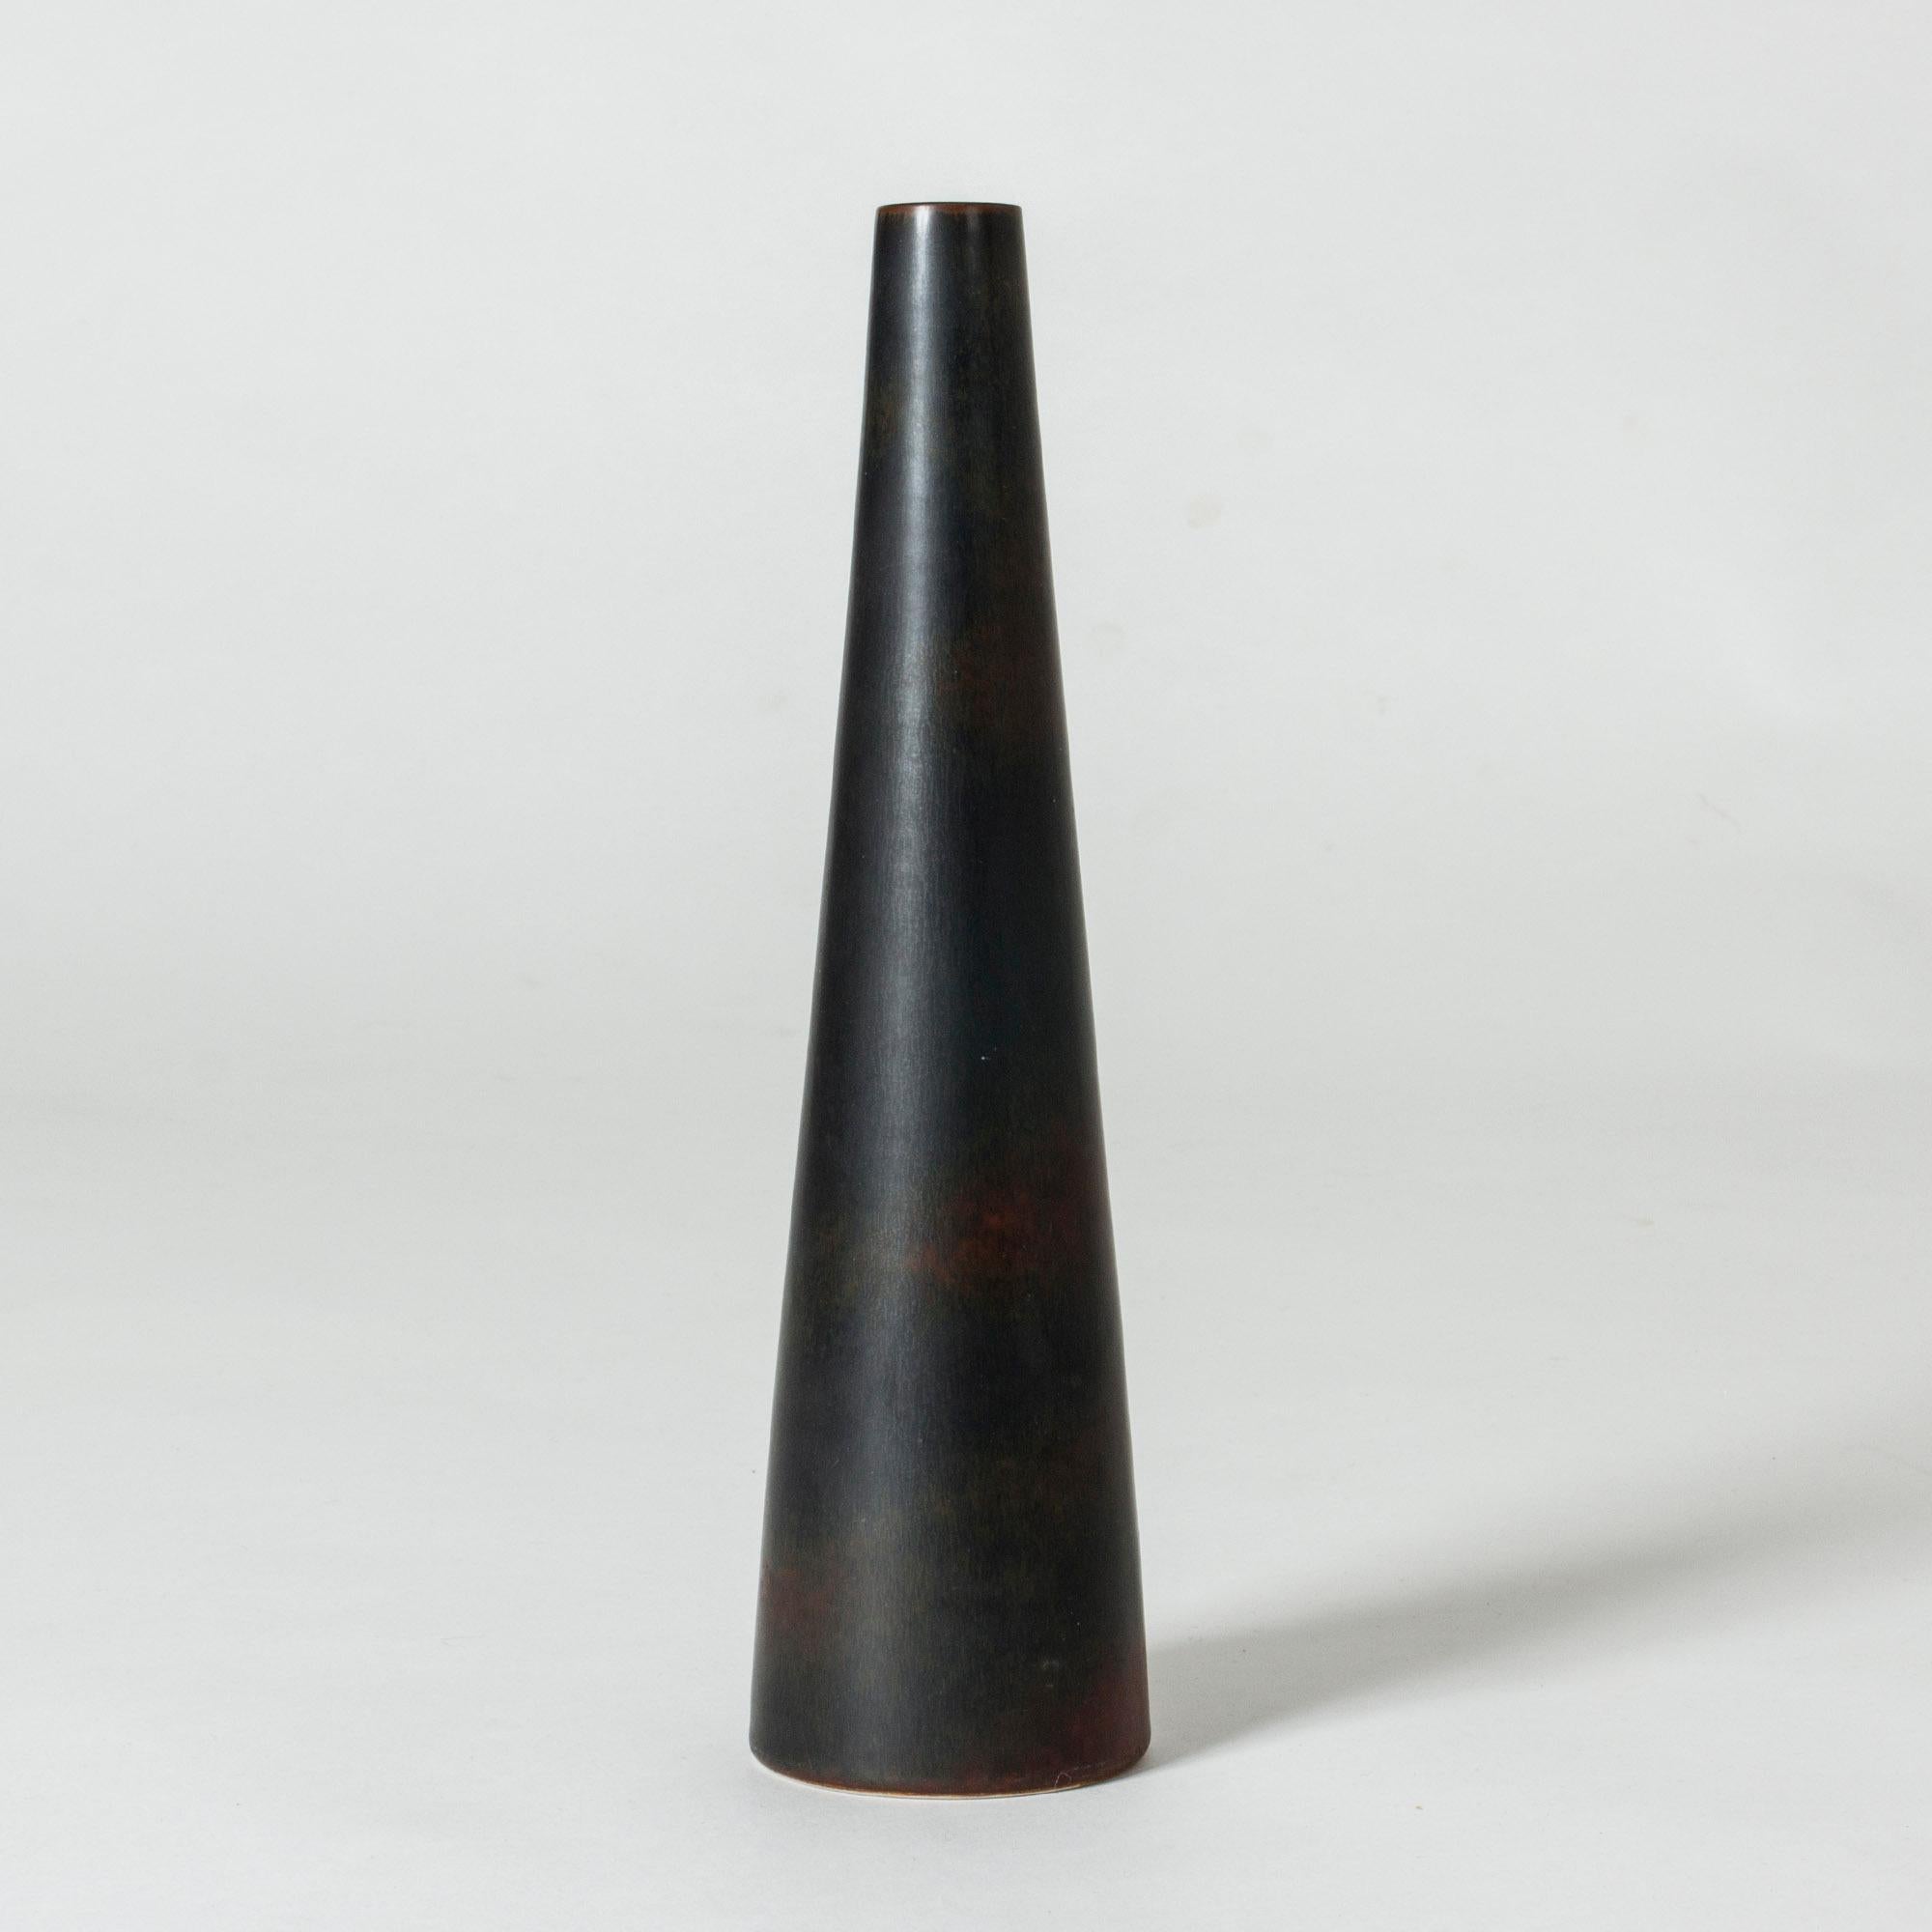 Stoneware vase by Carl-Harry Stålhane in a smooth, clean conical shape. Black hare’s fur glaze with dark red breaking the surface around the base.